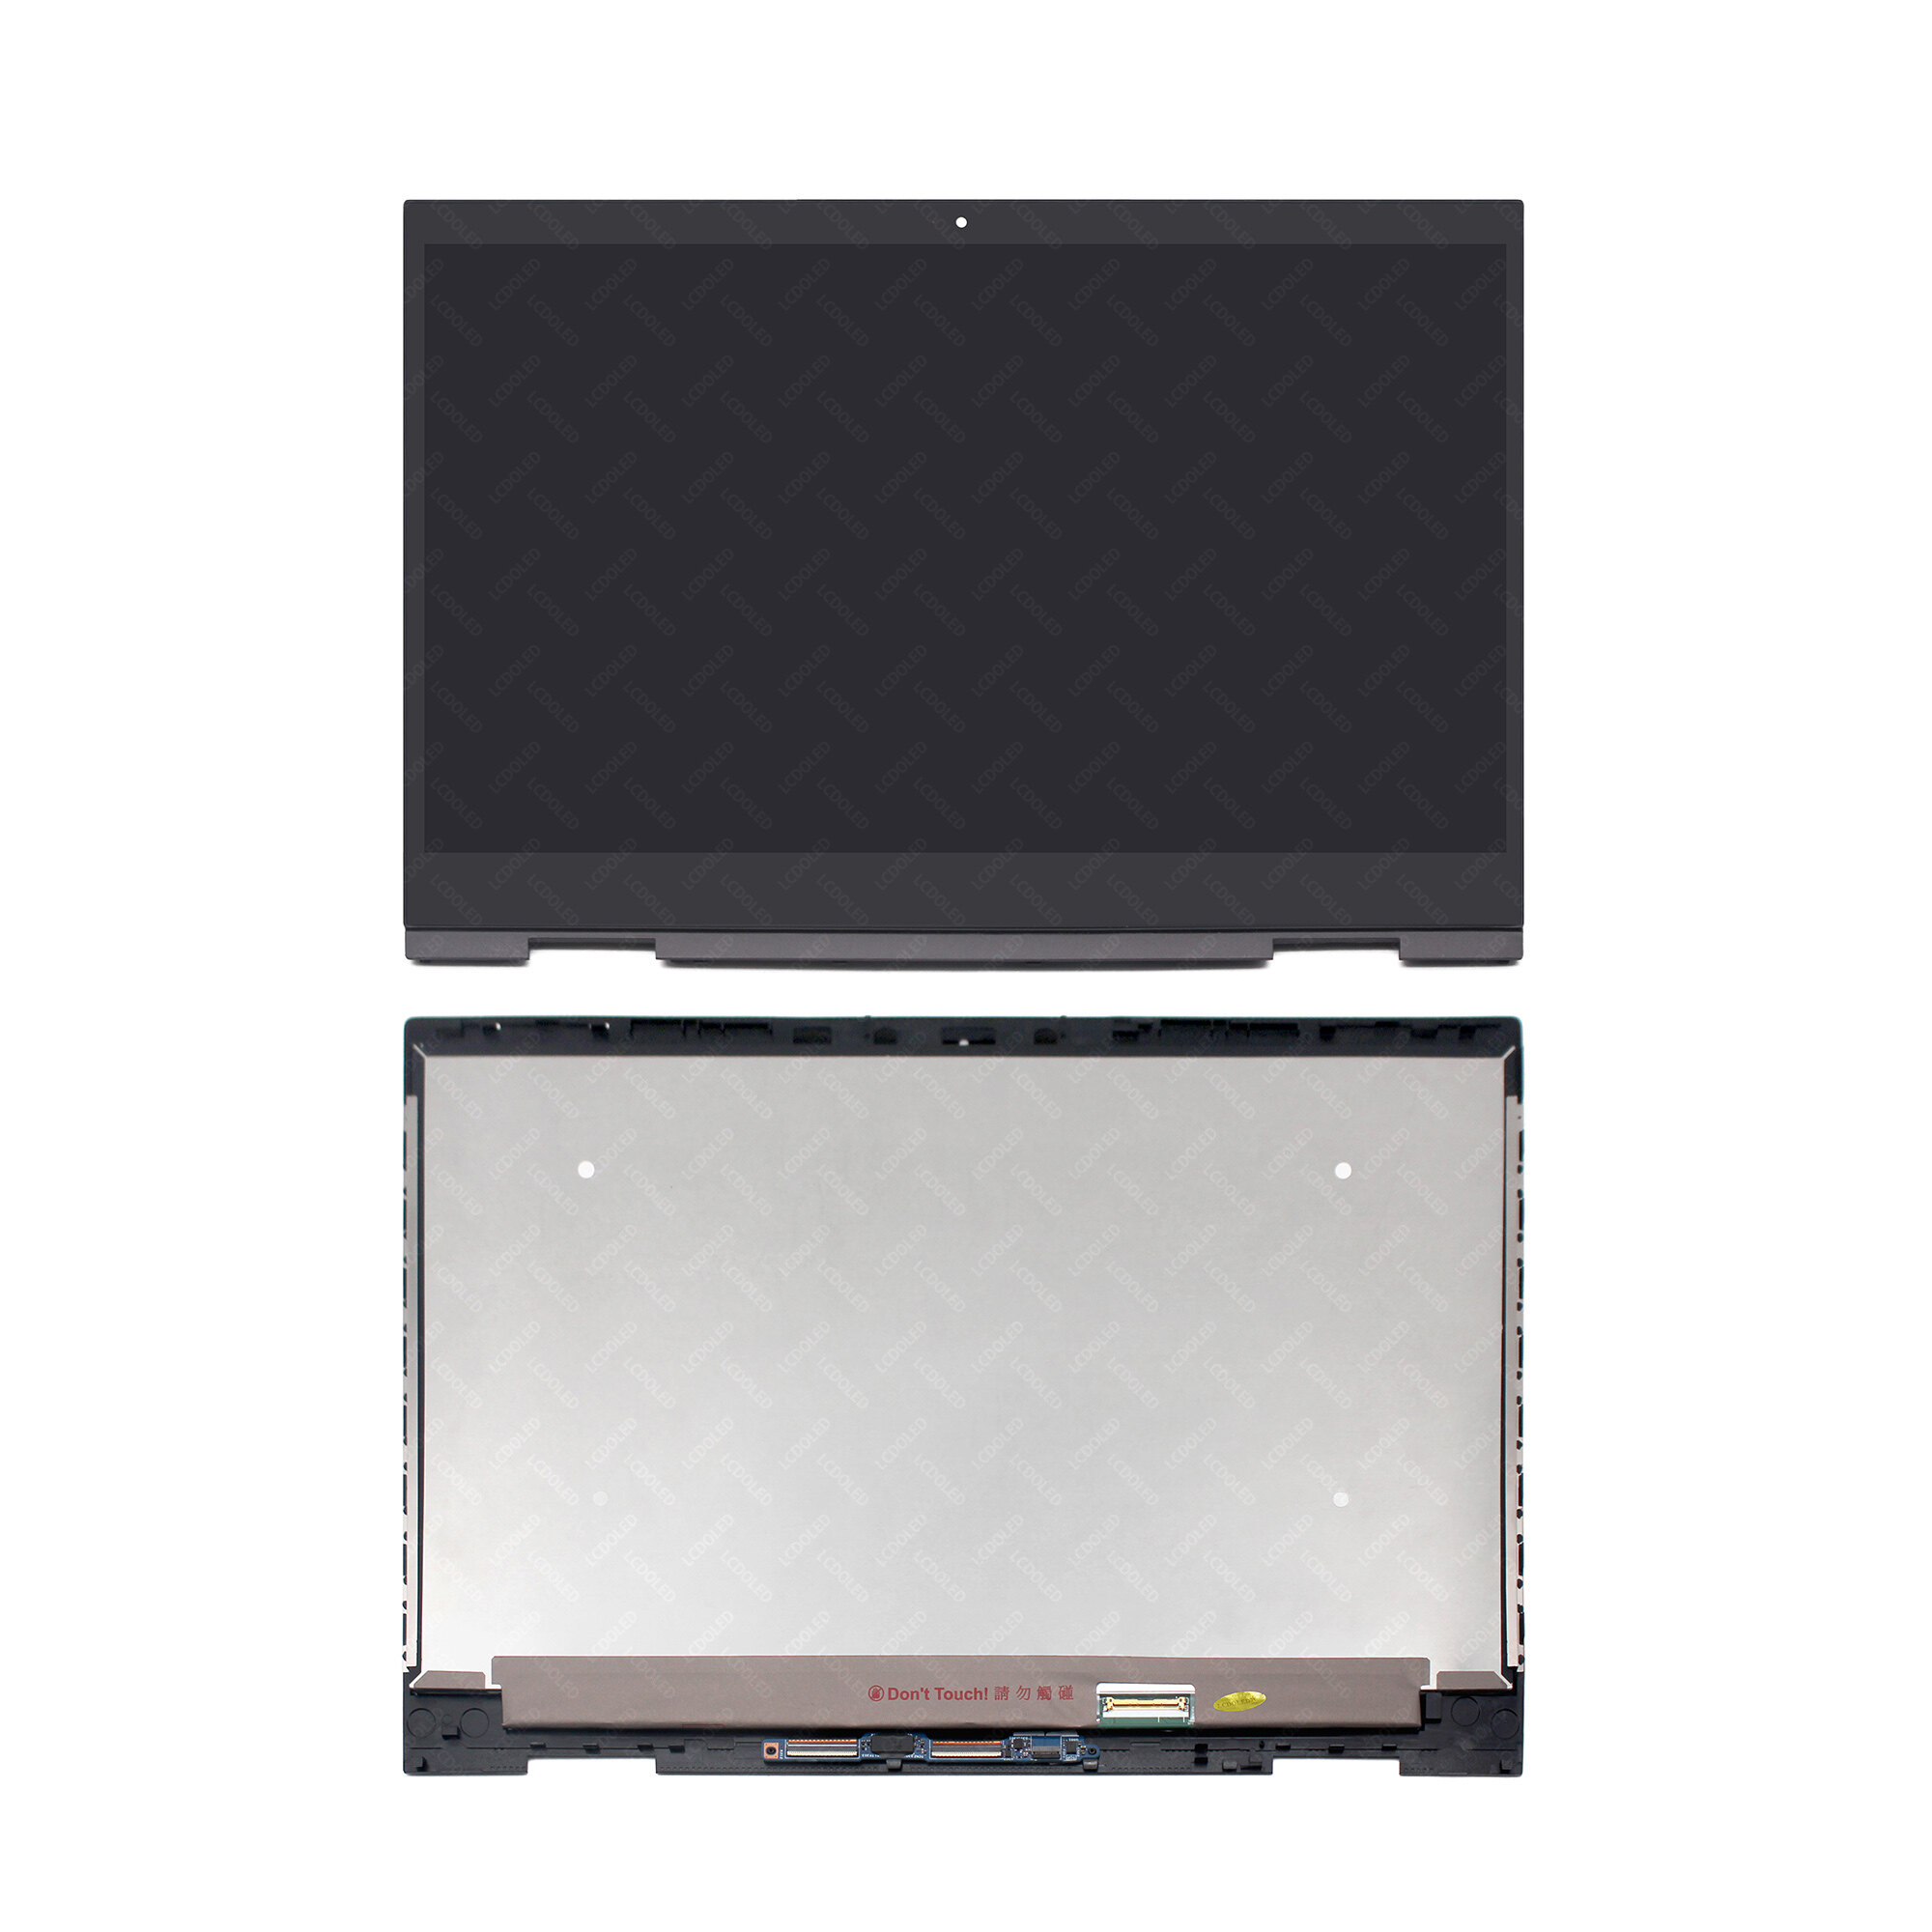 LCD Touch Screen Digitizer Assembly With Bezel For HP X360 15-cp0001na 4RE08EA 15-cp0010nr 15-cp0014au 15-CP0053CL 15-CP0076NR